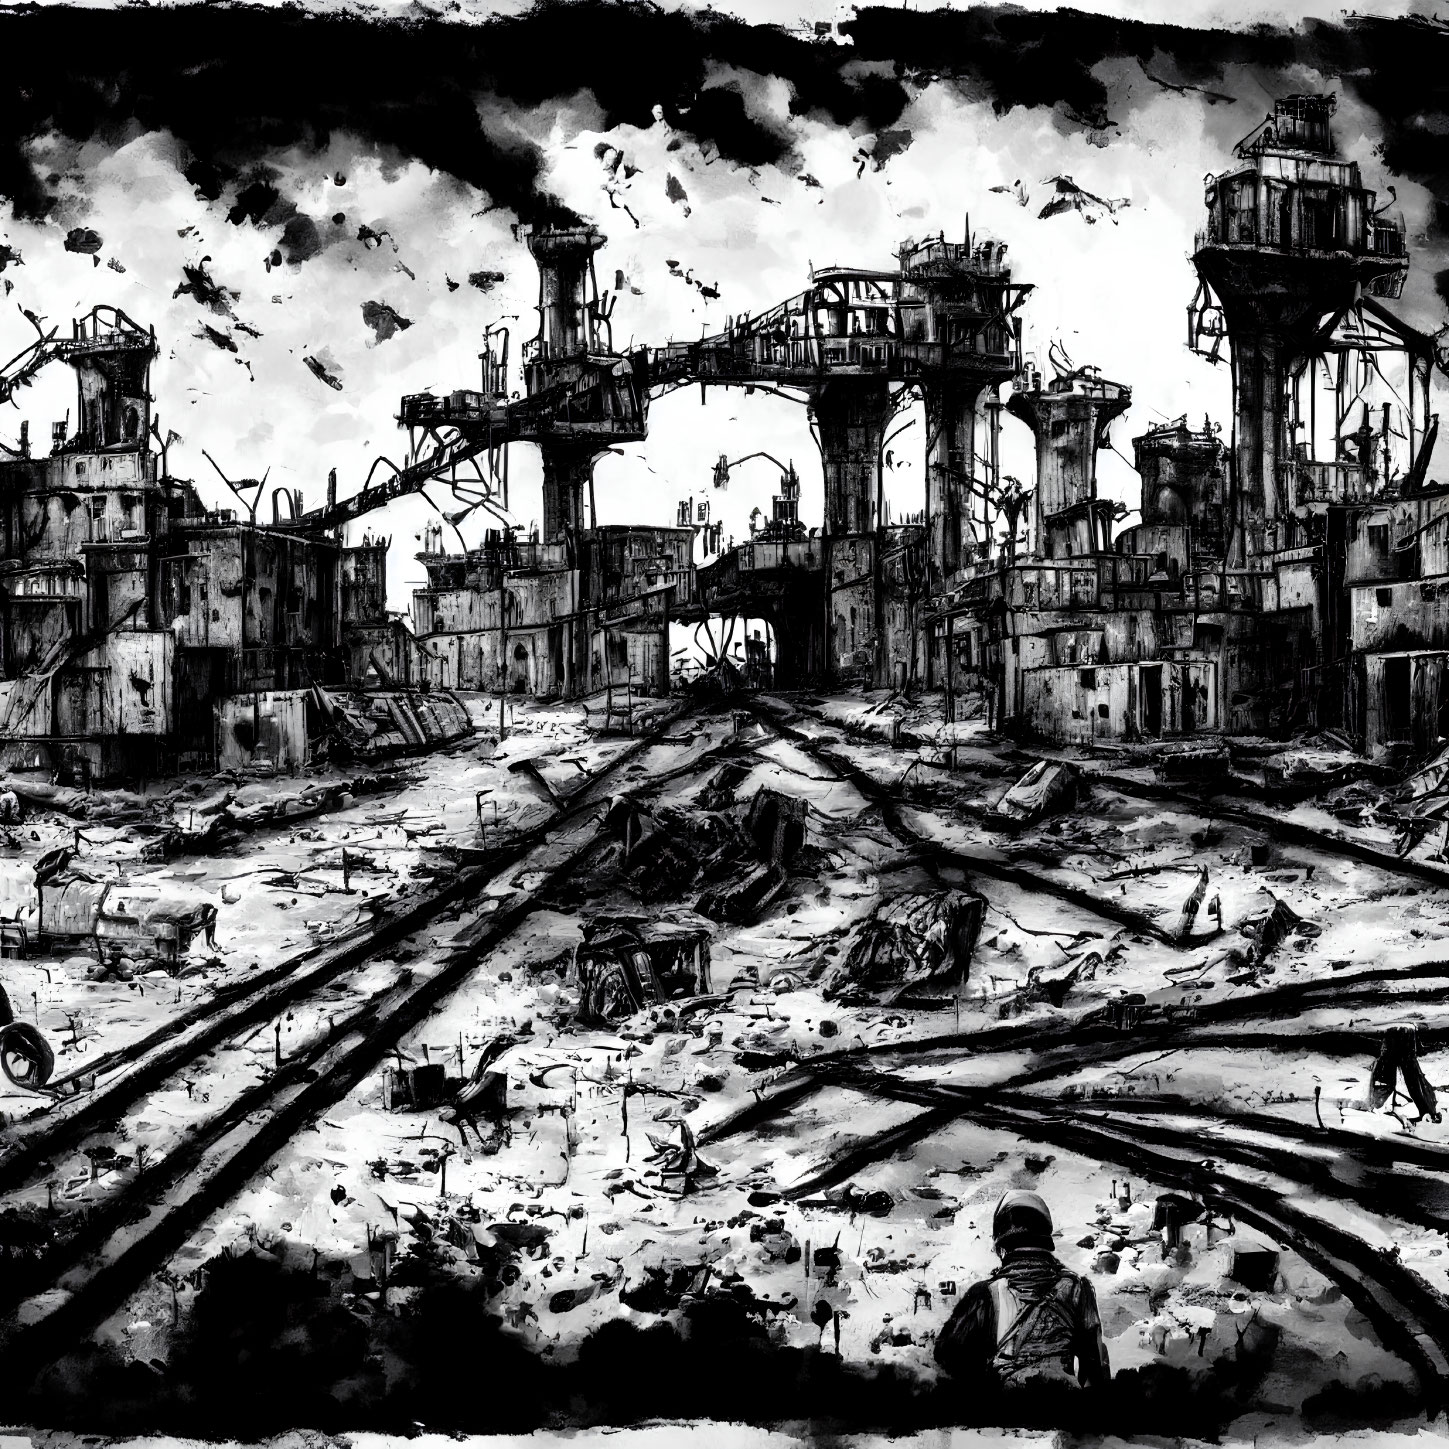 Dystopian landscape with industrial ruins and solitary figure